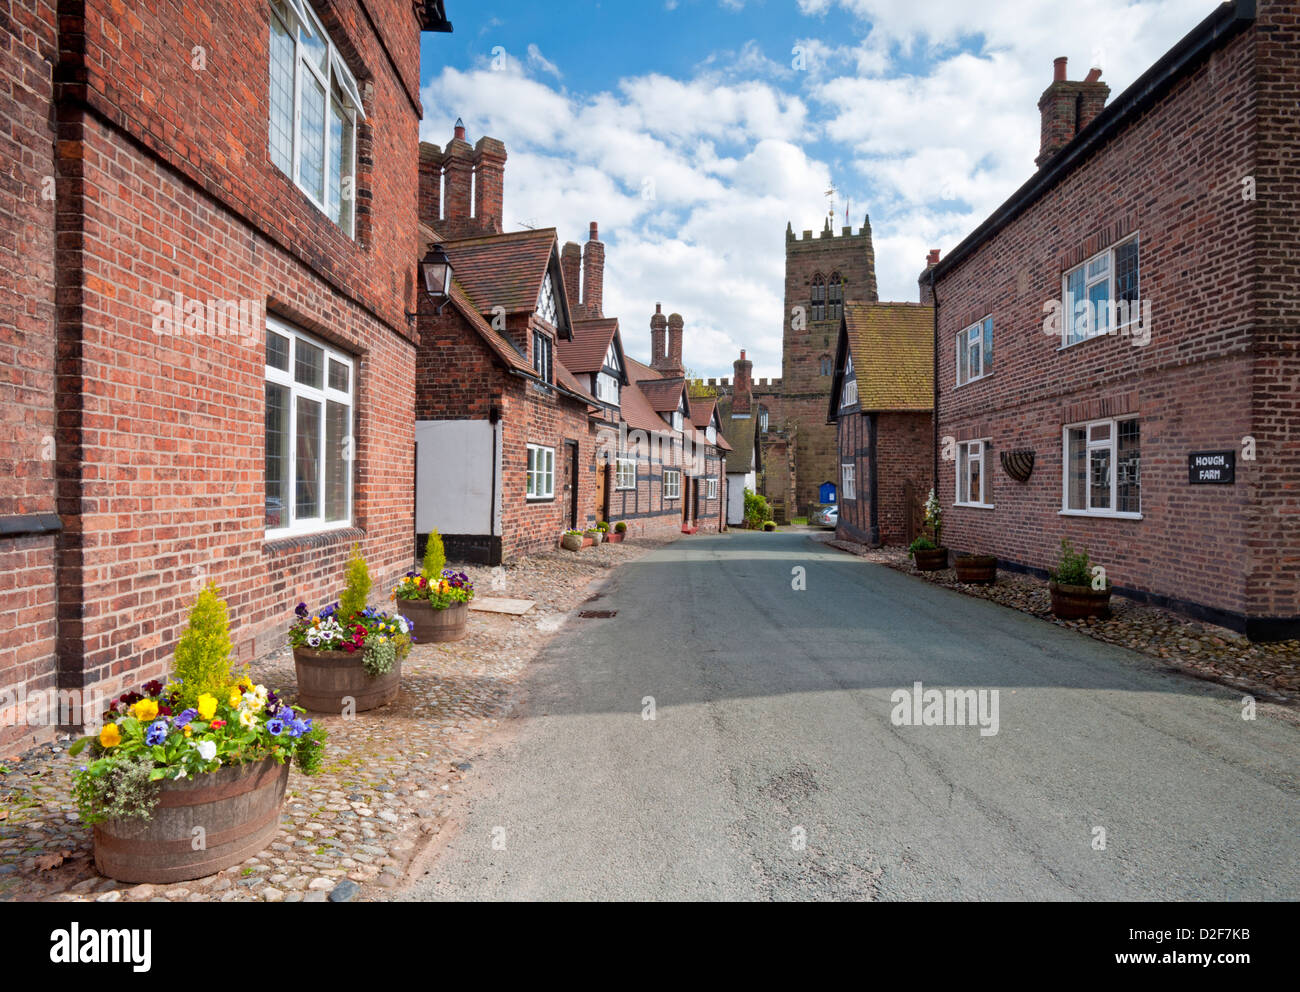 Spring in the Village of Great Budworth, Great Budworth, Cheshire, England, UK Stock Photo